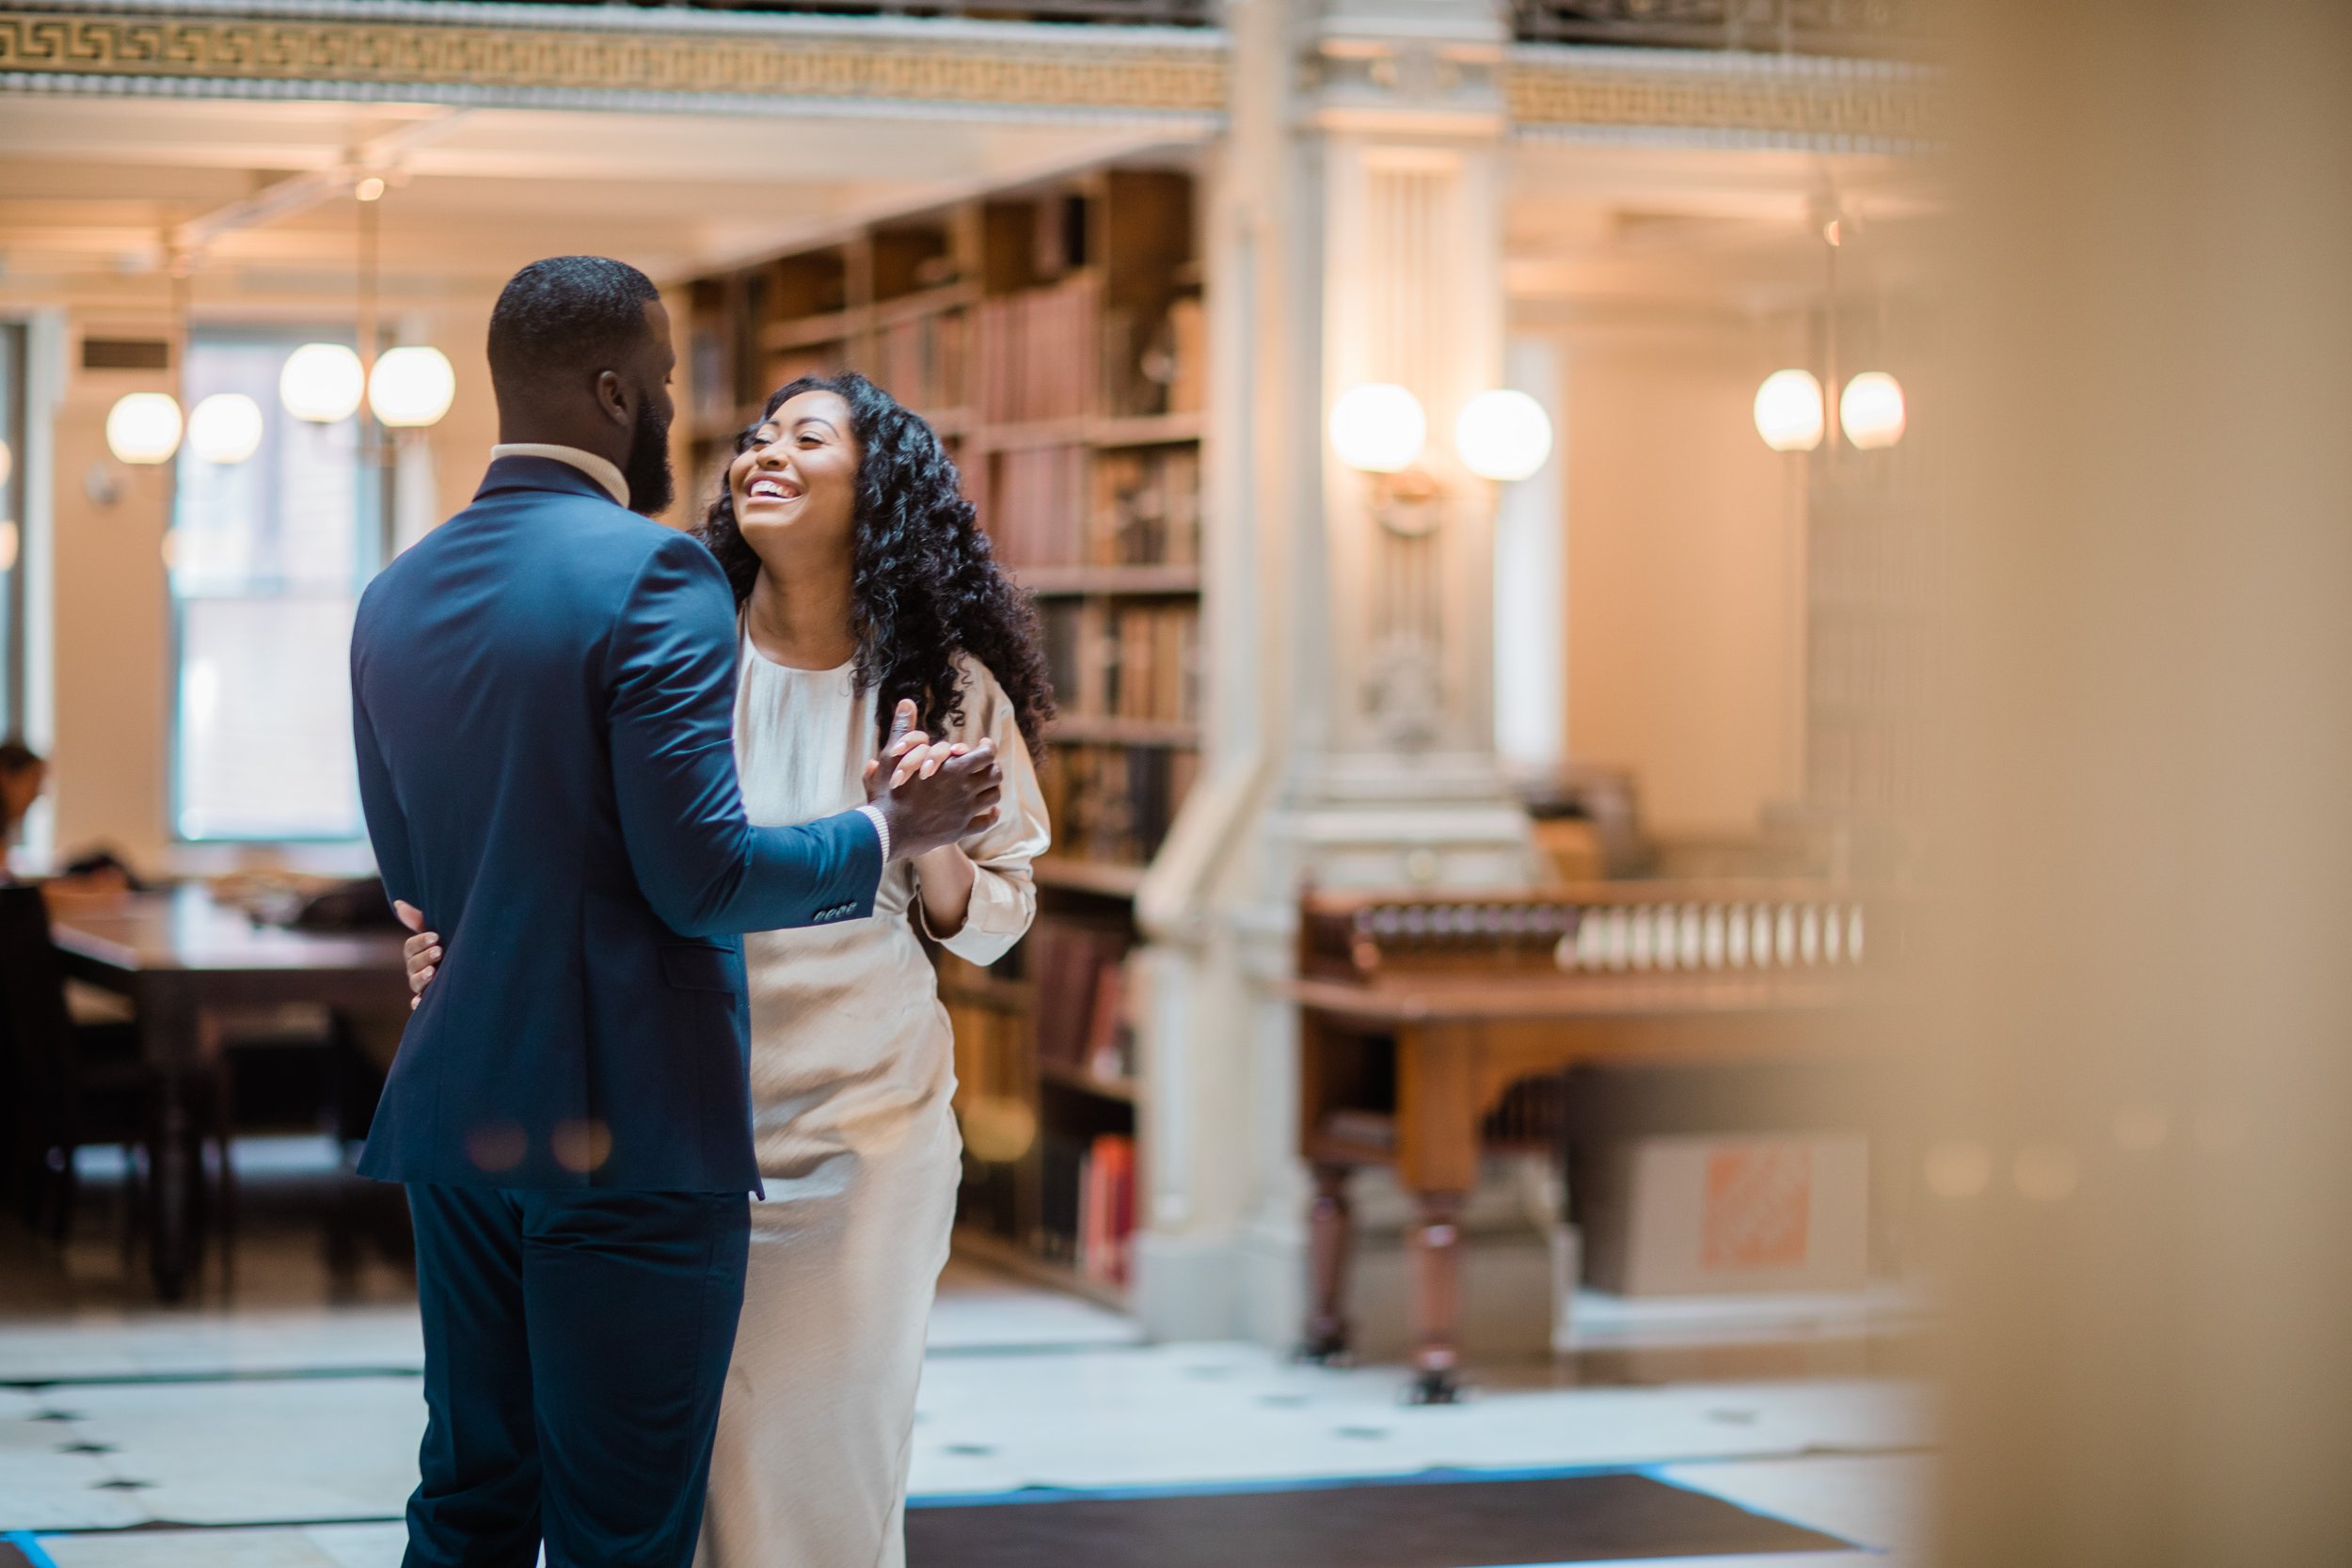 Disney Beauty and The Beast Inspired Engagement Session at The Peabody Library Baltimore Maryland shot by Megapixels Media Photography-16.jpg